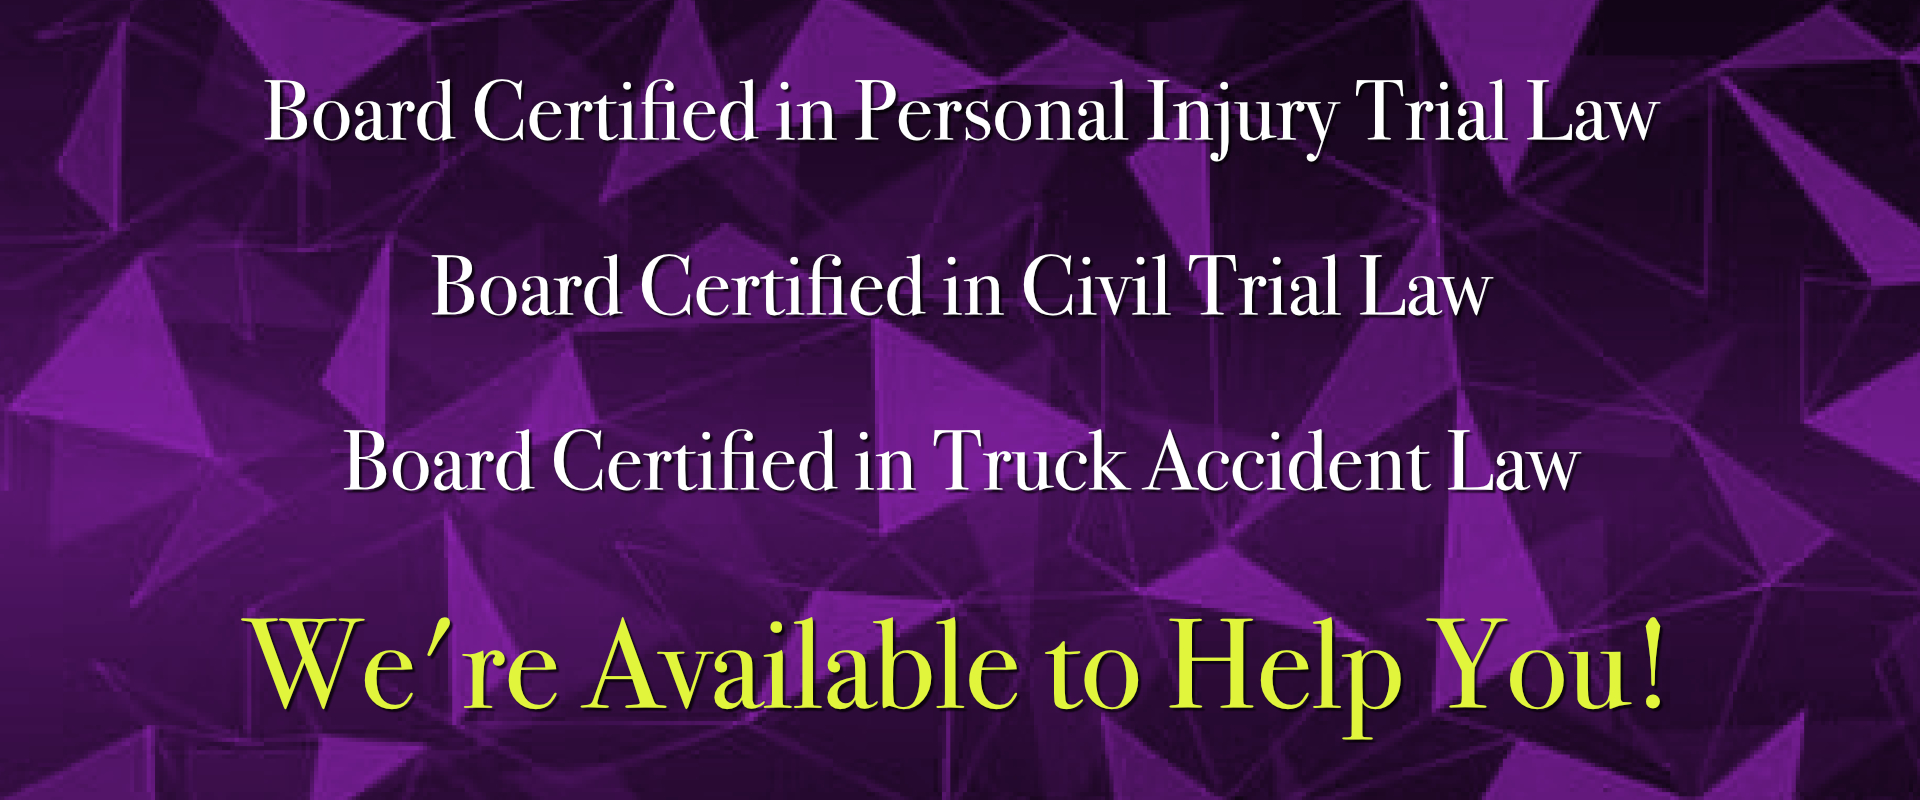 Board Certified Attorneys Here to Help You